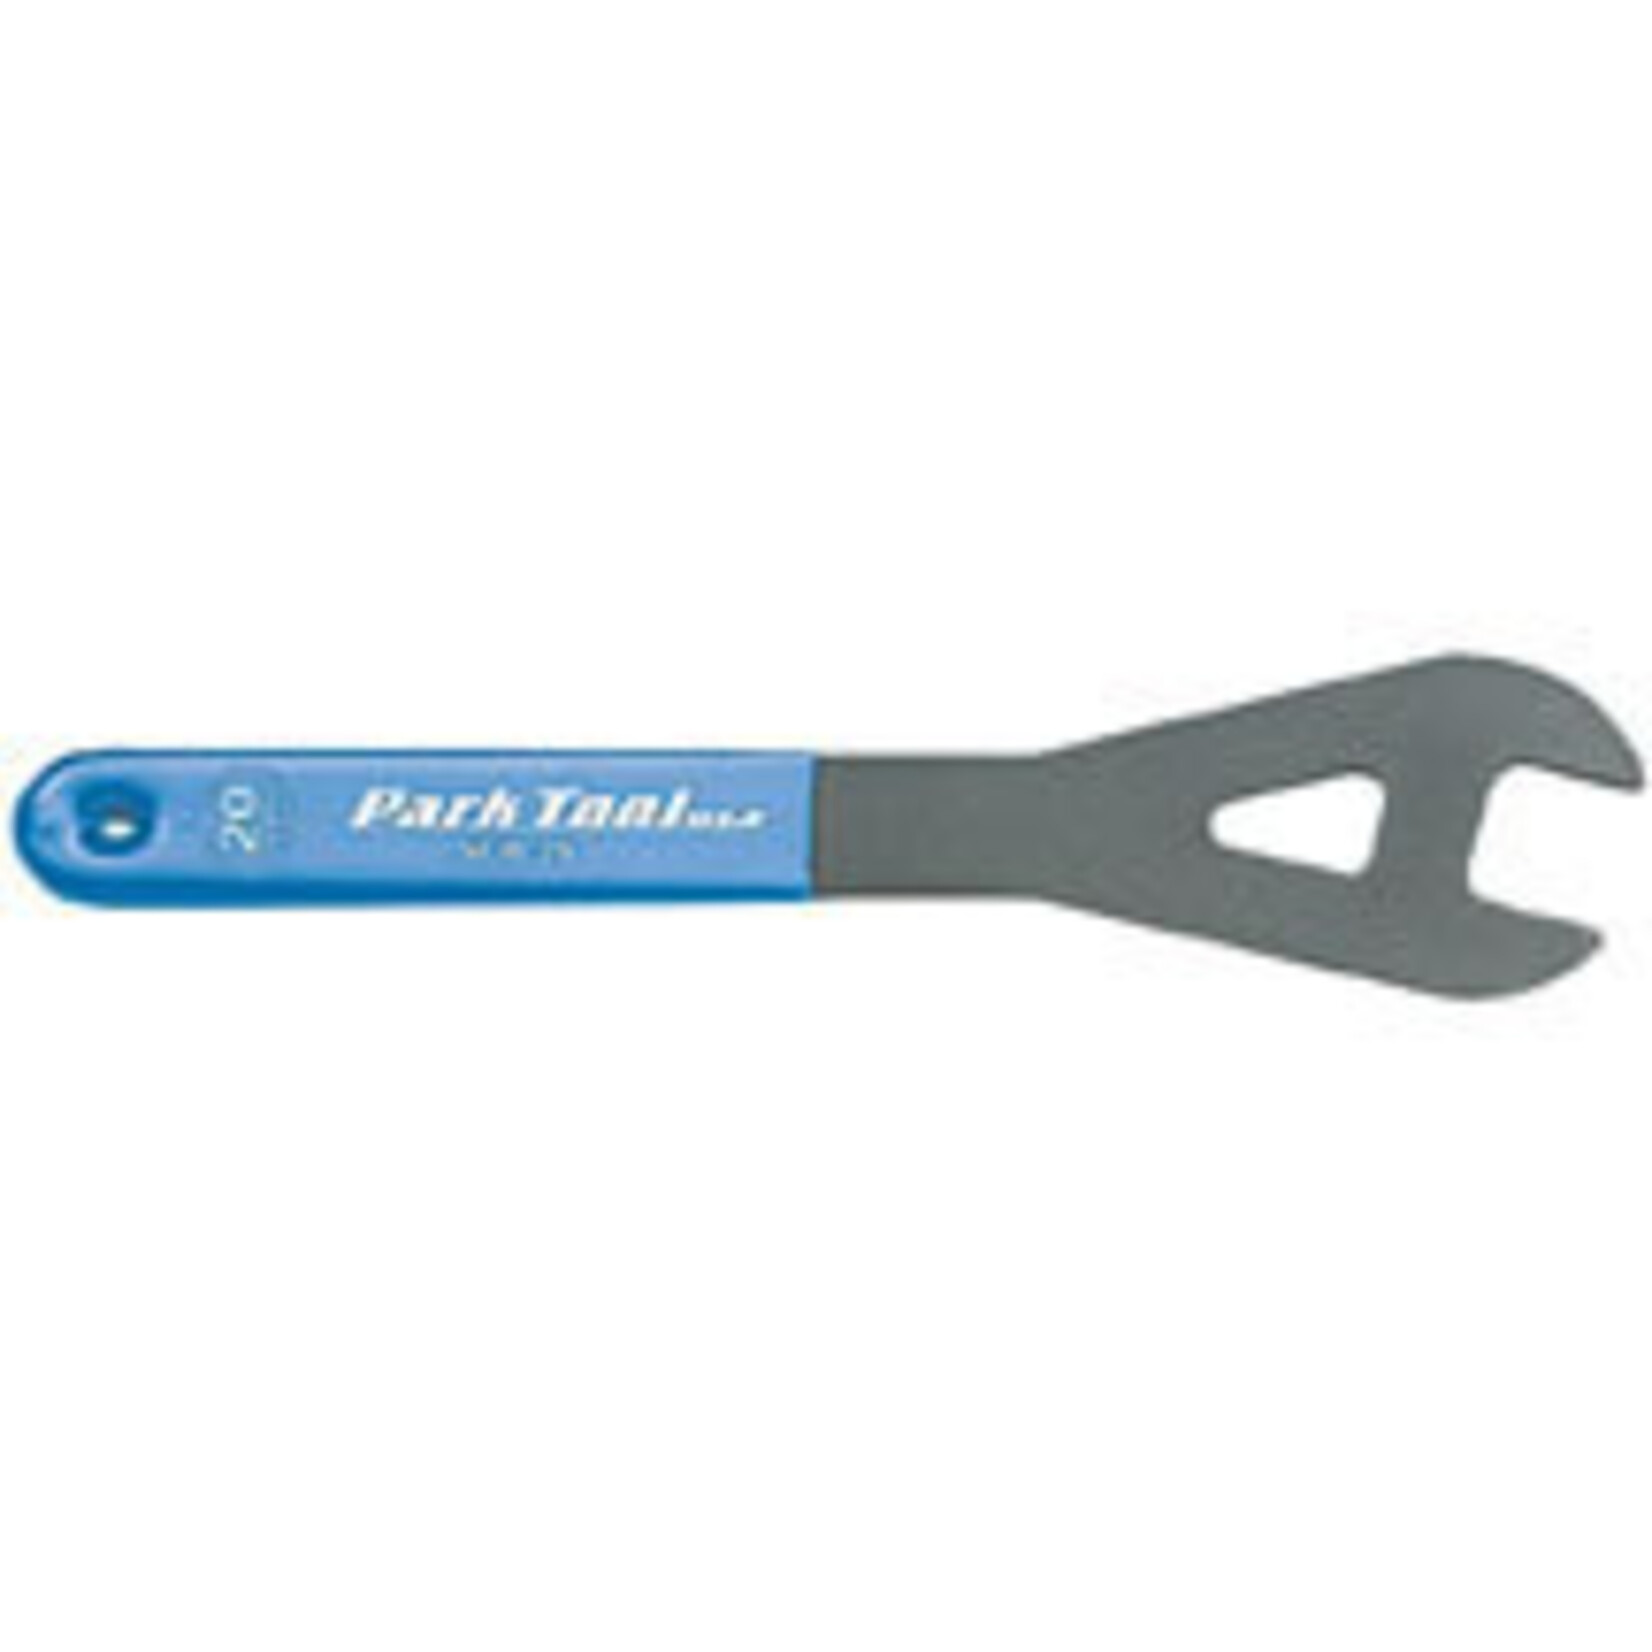 Park Tool Park Tool Shop 17mm Cone Wrench SCW-17